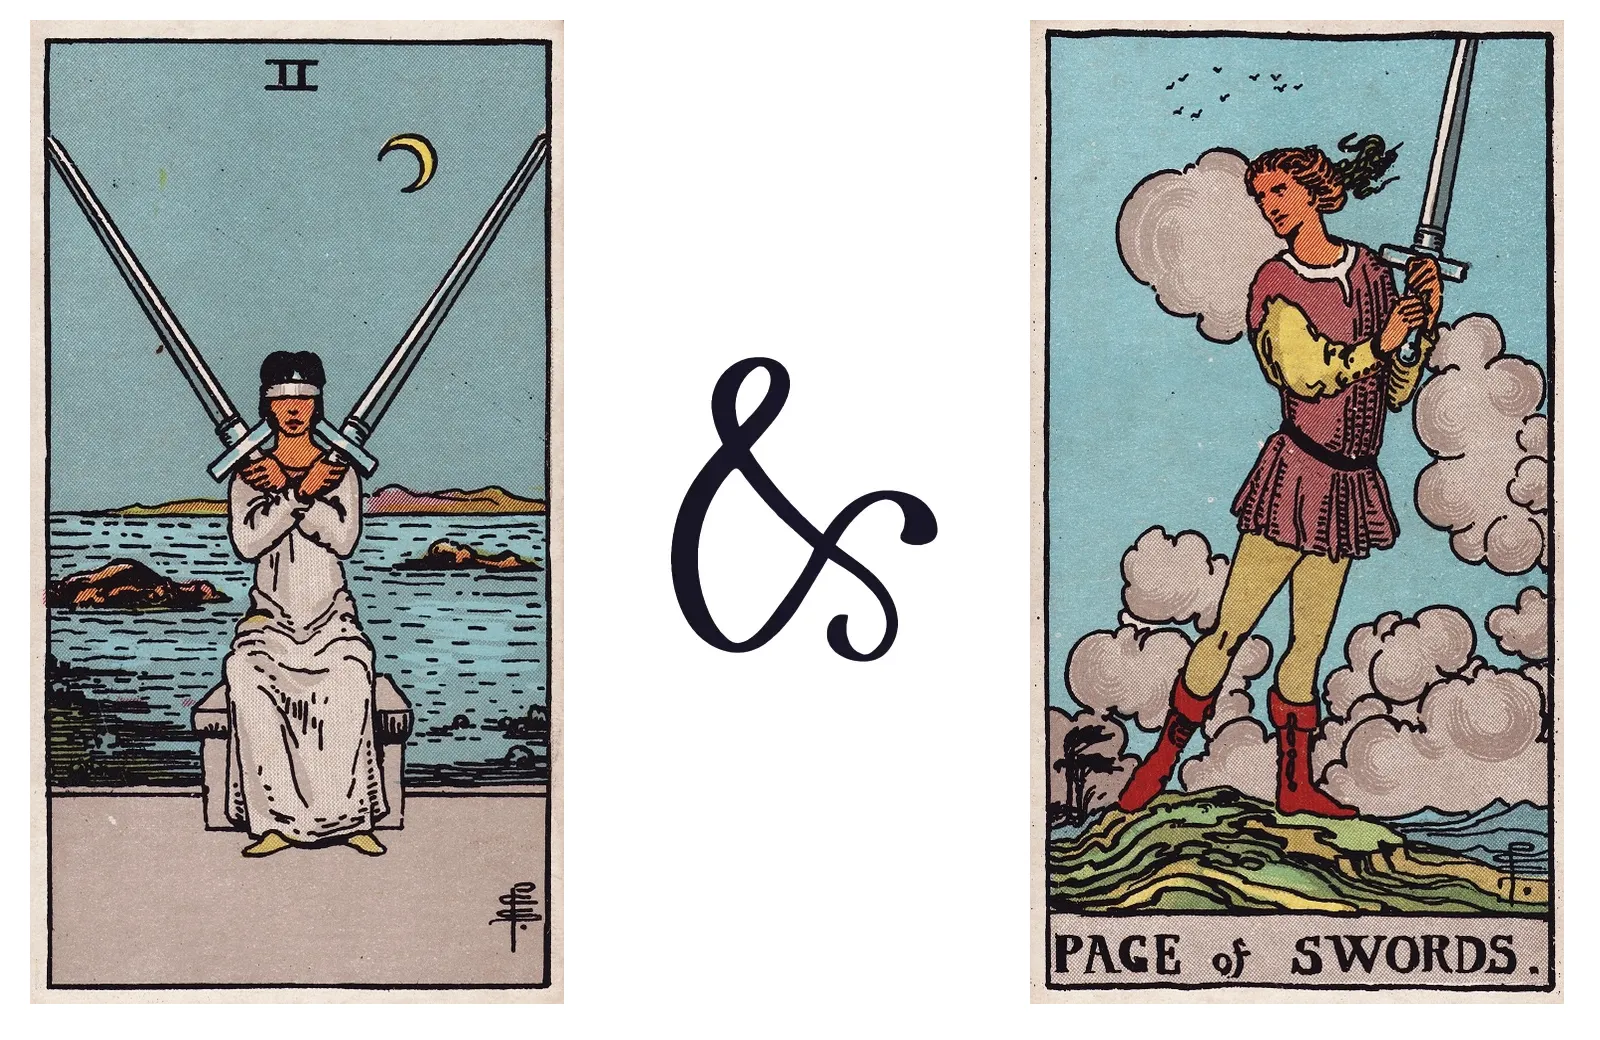 Two of Swords and Page of Swords